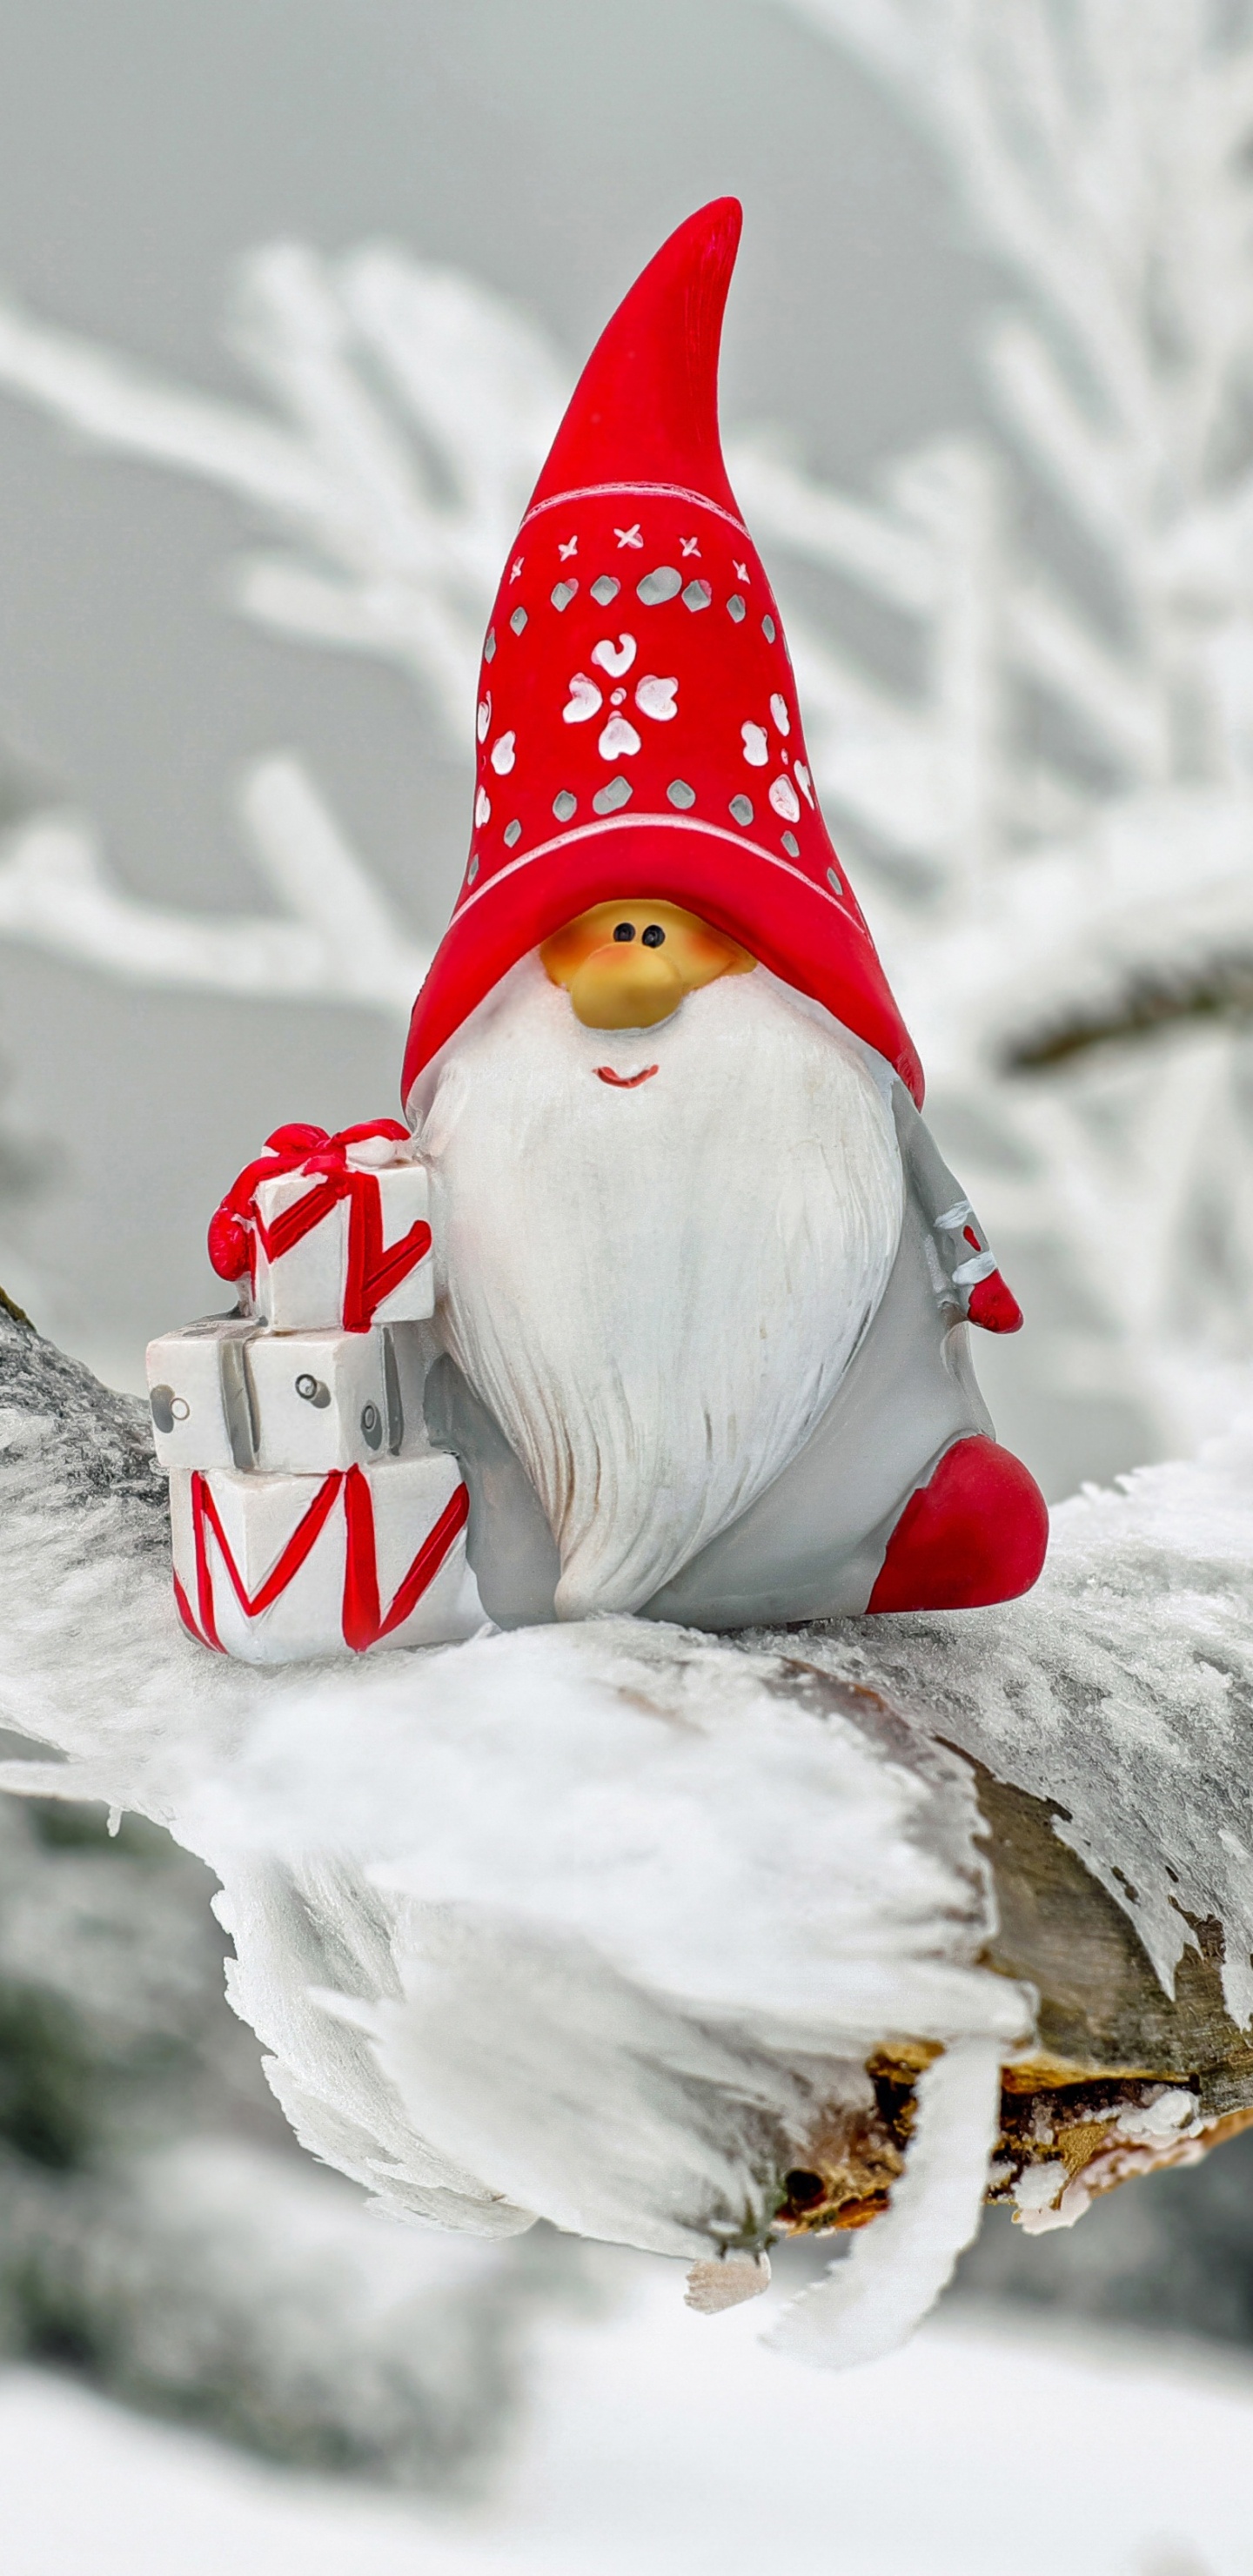 Santa Claus, Christmas Day, Winter, Snow, Freezing. Wallpaper in 1440x2960 Resolution